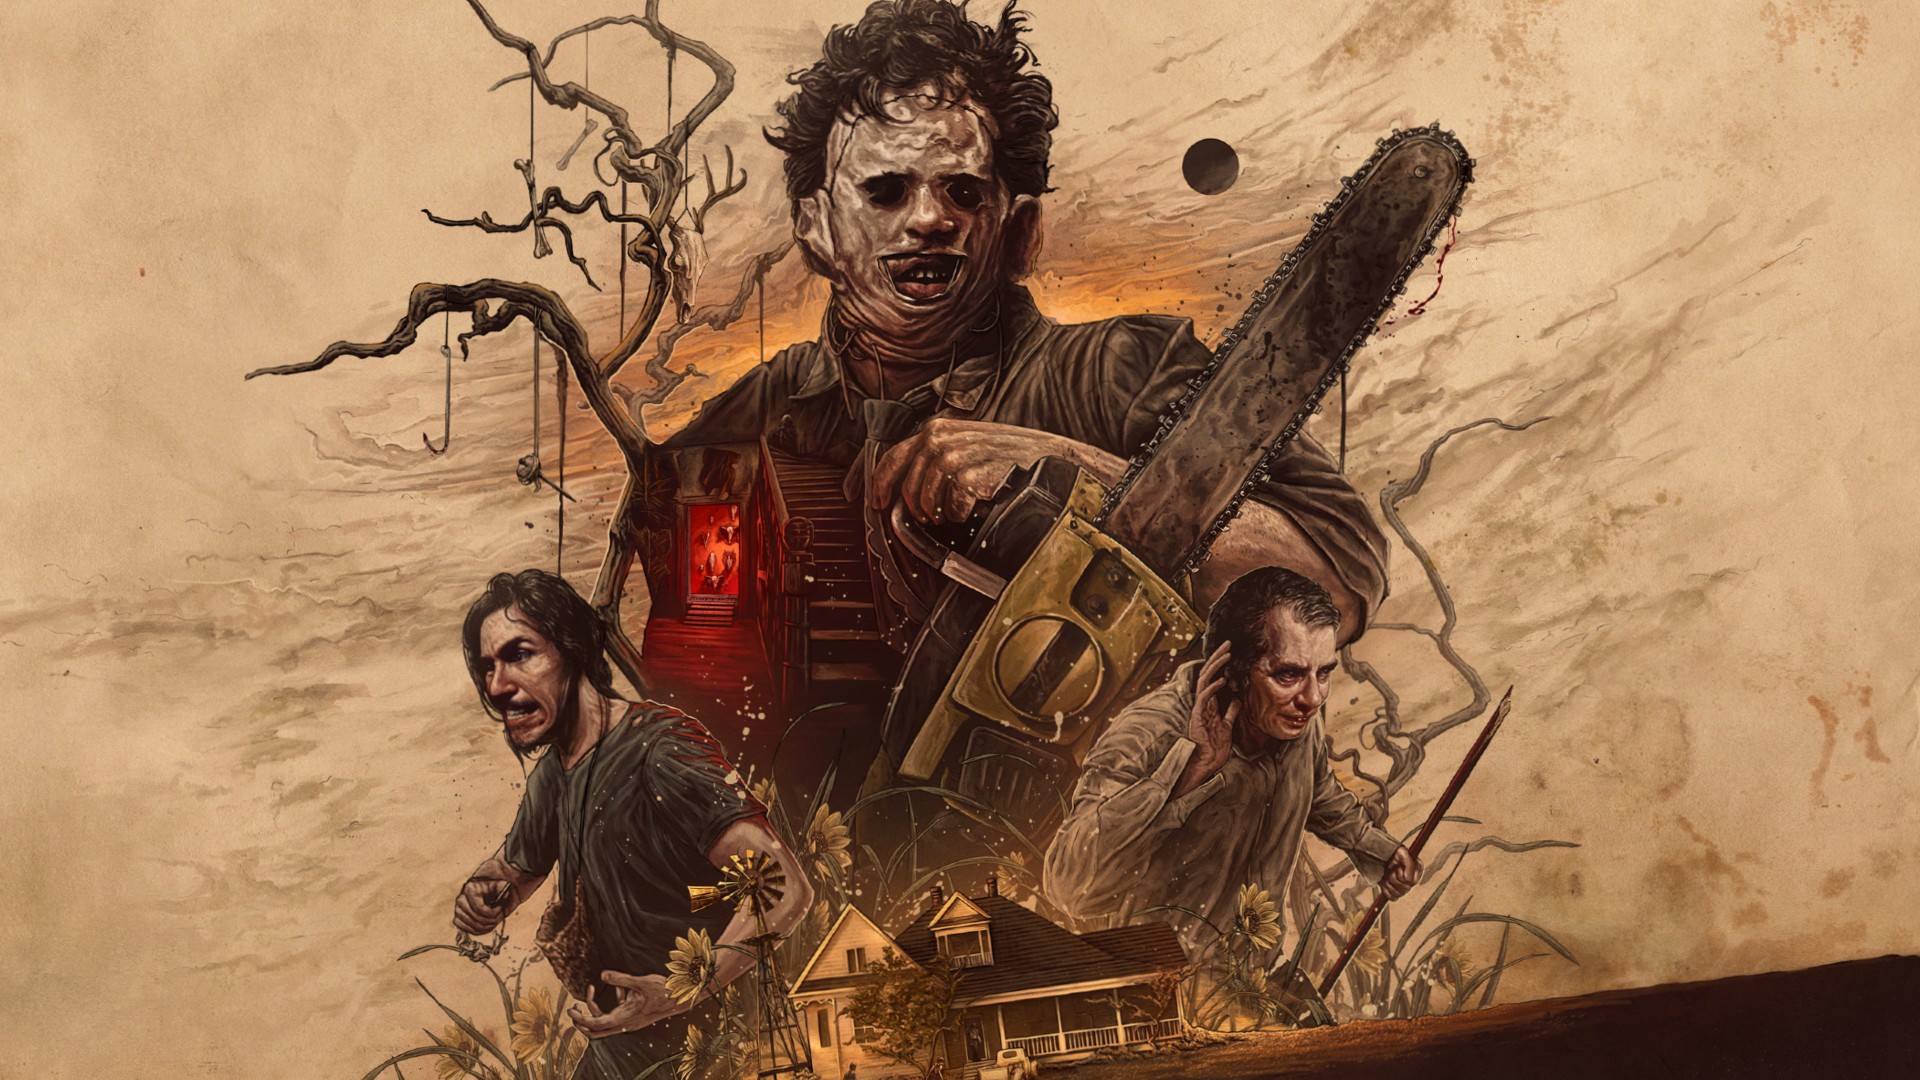 Key art for The Texas Chain Saw Massacre game, showing Leatherface, Hitchhiker, and Cook, with the family house.